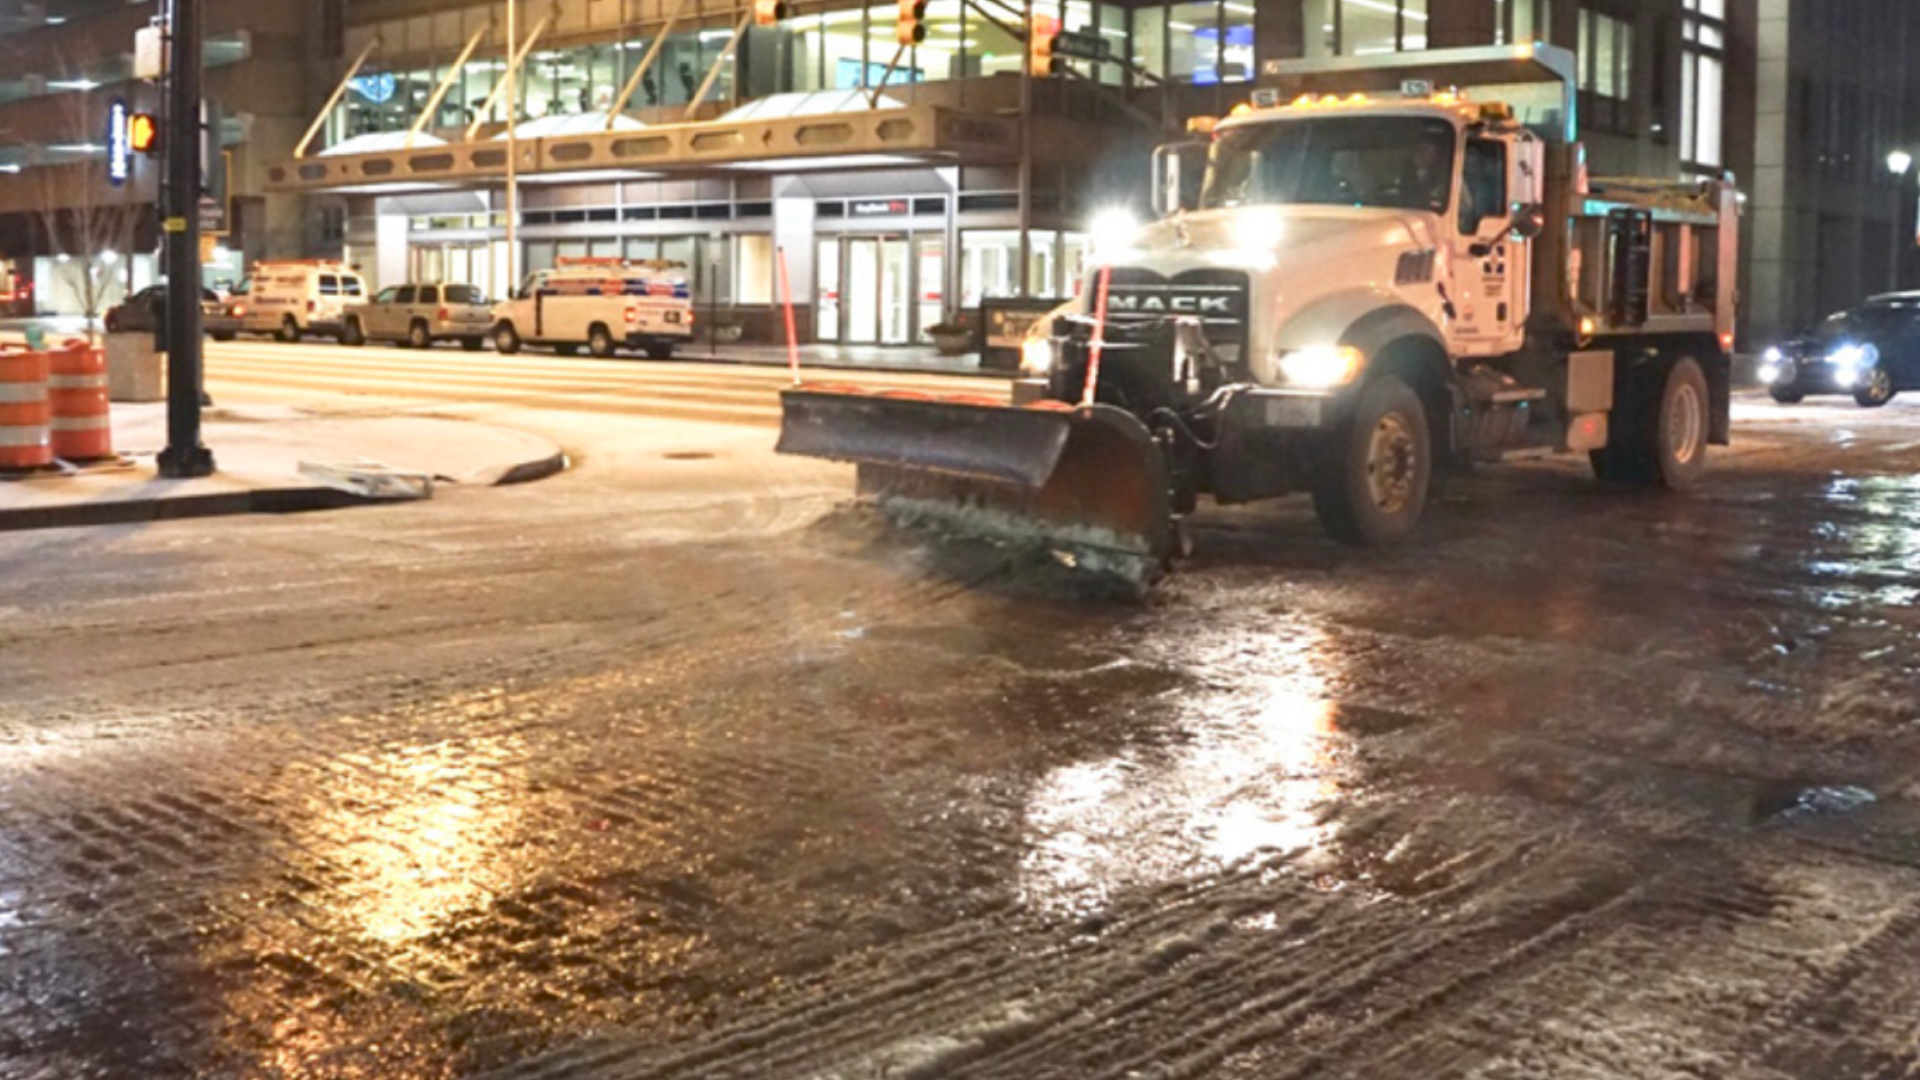 Indianapolis DPW has called out a full shift of 80 plow trucks to begin pre-treating roadways for potential slick spots Sunday night.